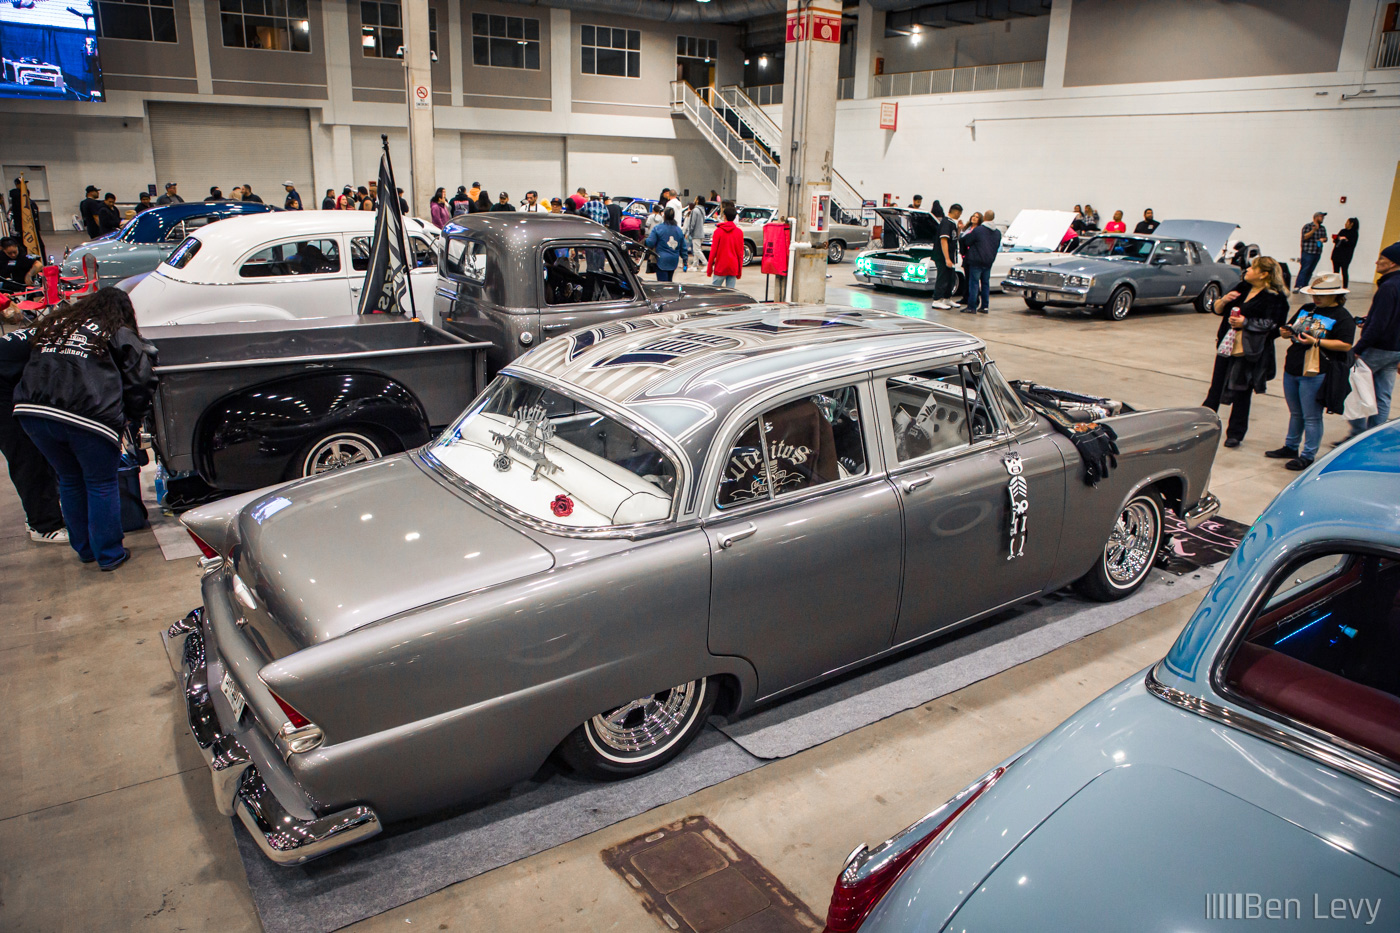 1955 Plymouth Savoy at Lowrider Show in Chicago